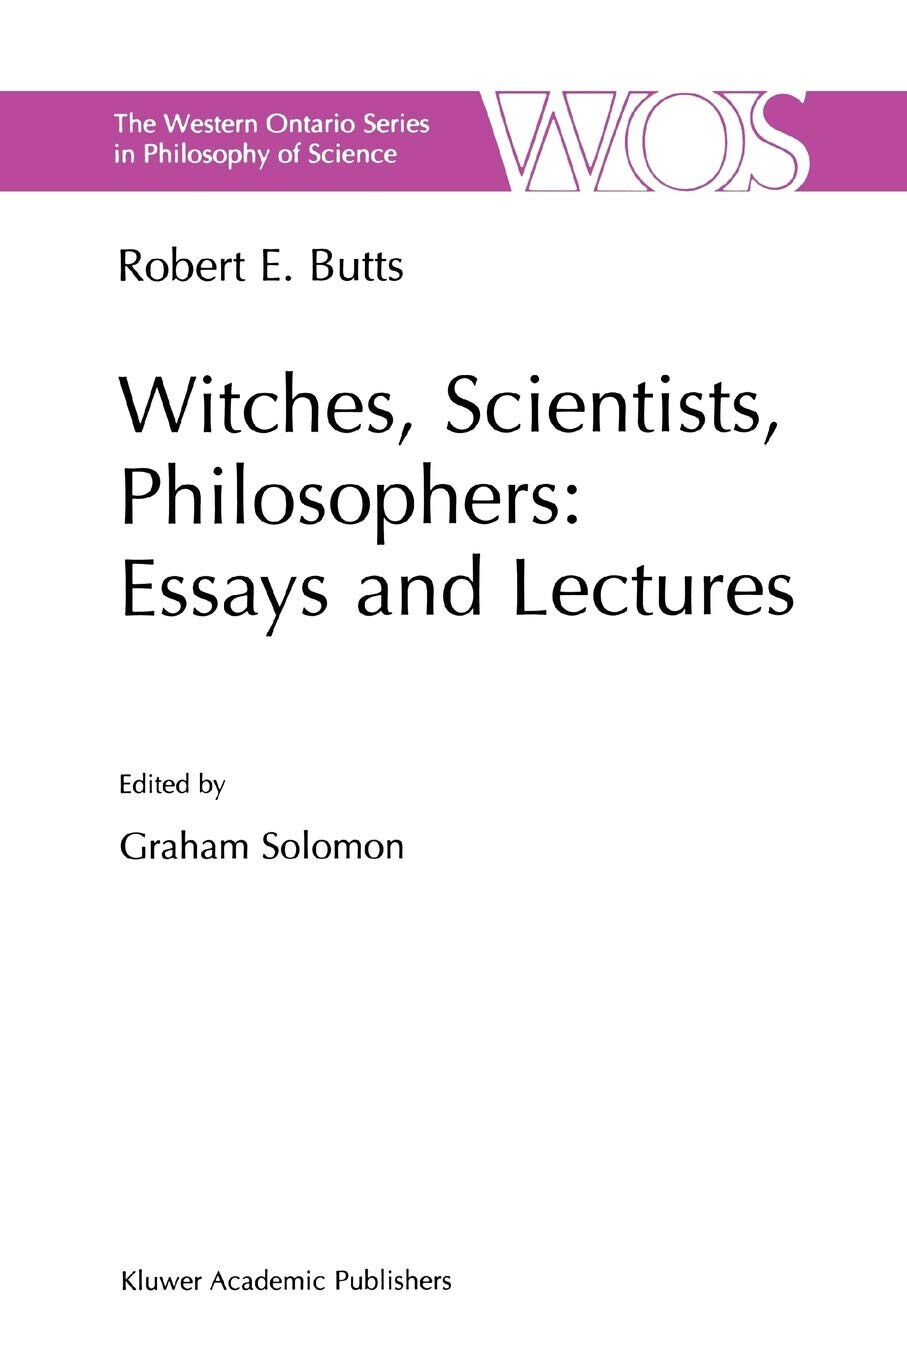 Witches, Scientists, Philosophers: Essays and Lectures - Robert E. Butts - 2010